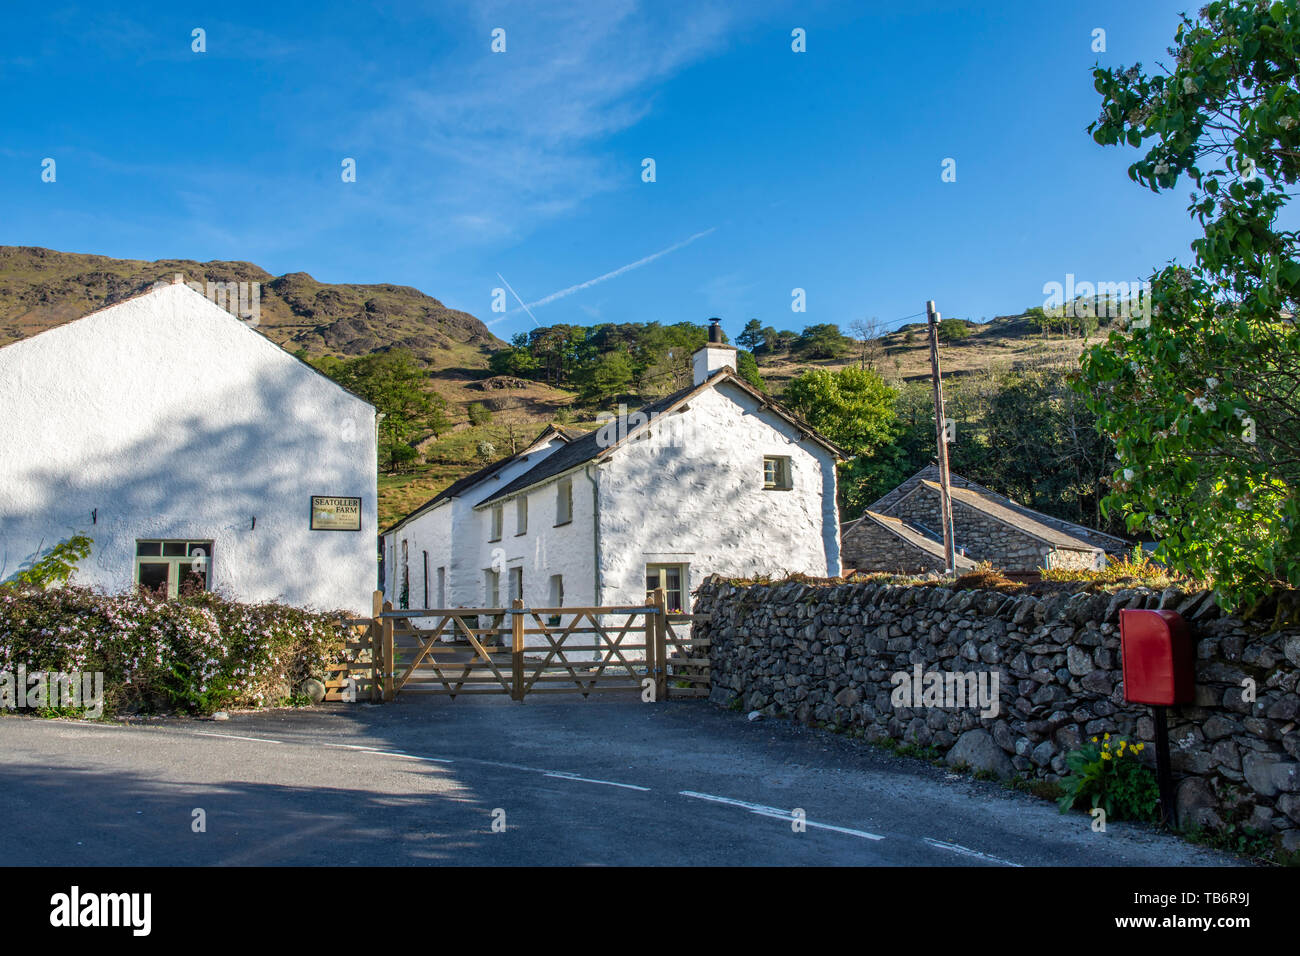 The  picturesque hamlet of Seatoller, Borrowdale, near Keswick, Lake District, Cumbria, UK  with traditional stone buildings Stock Photo